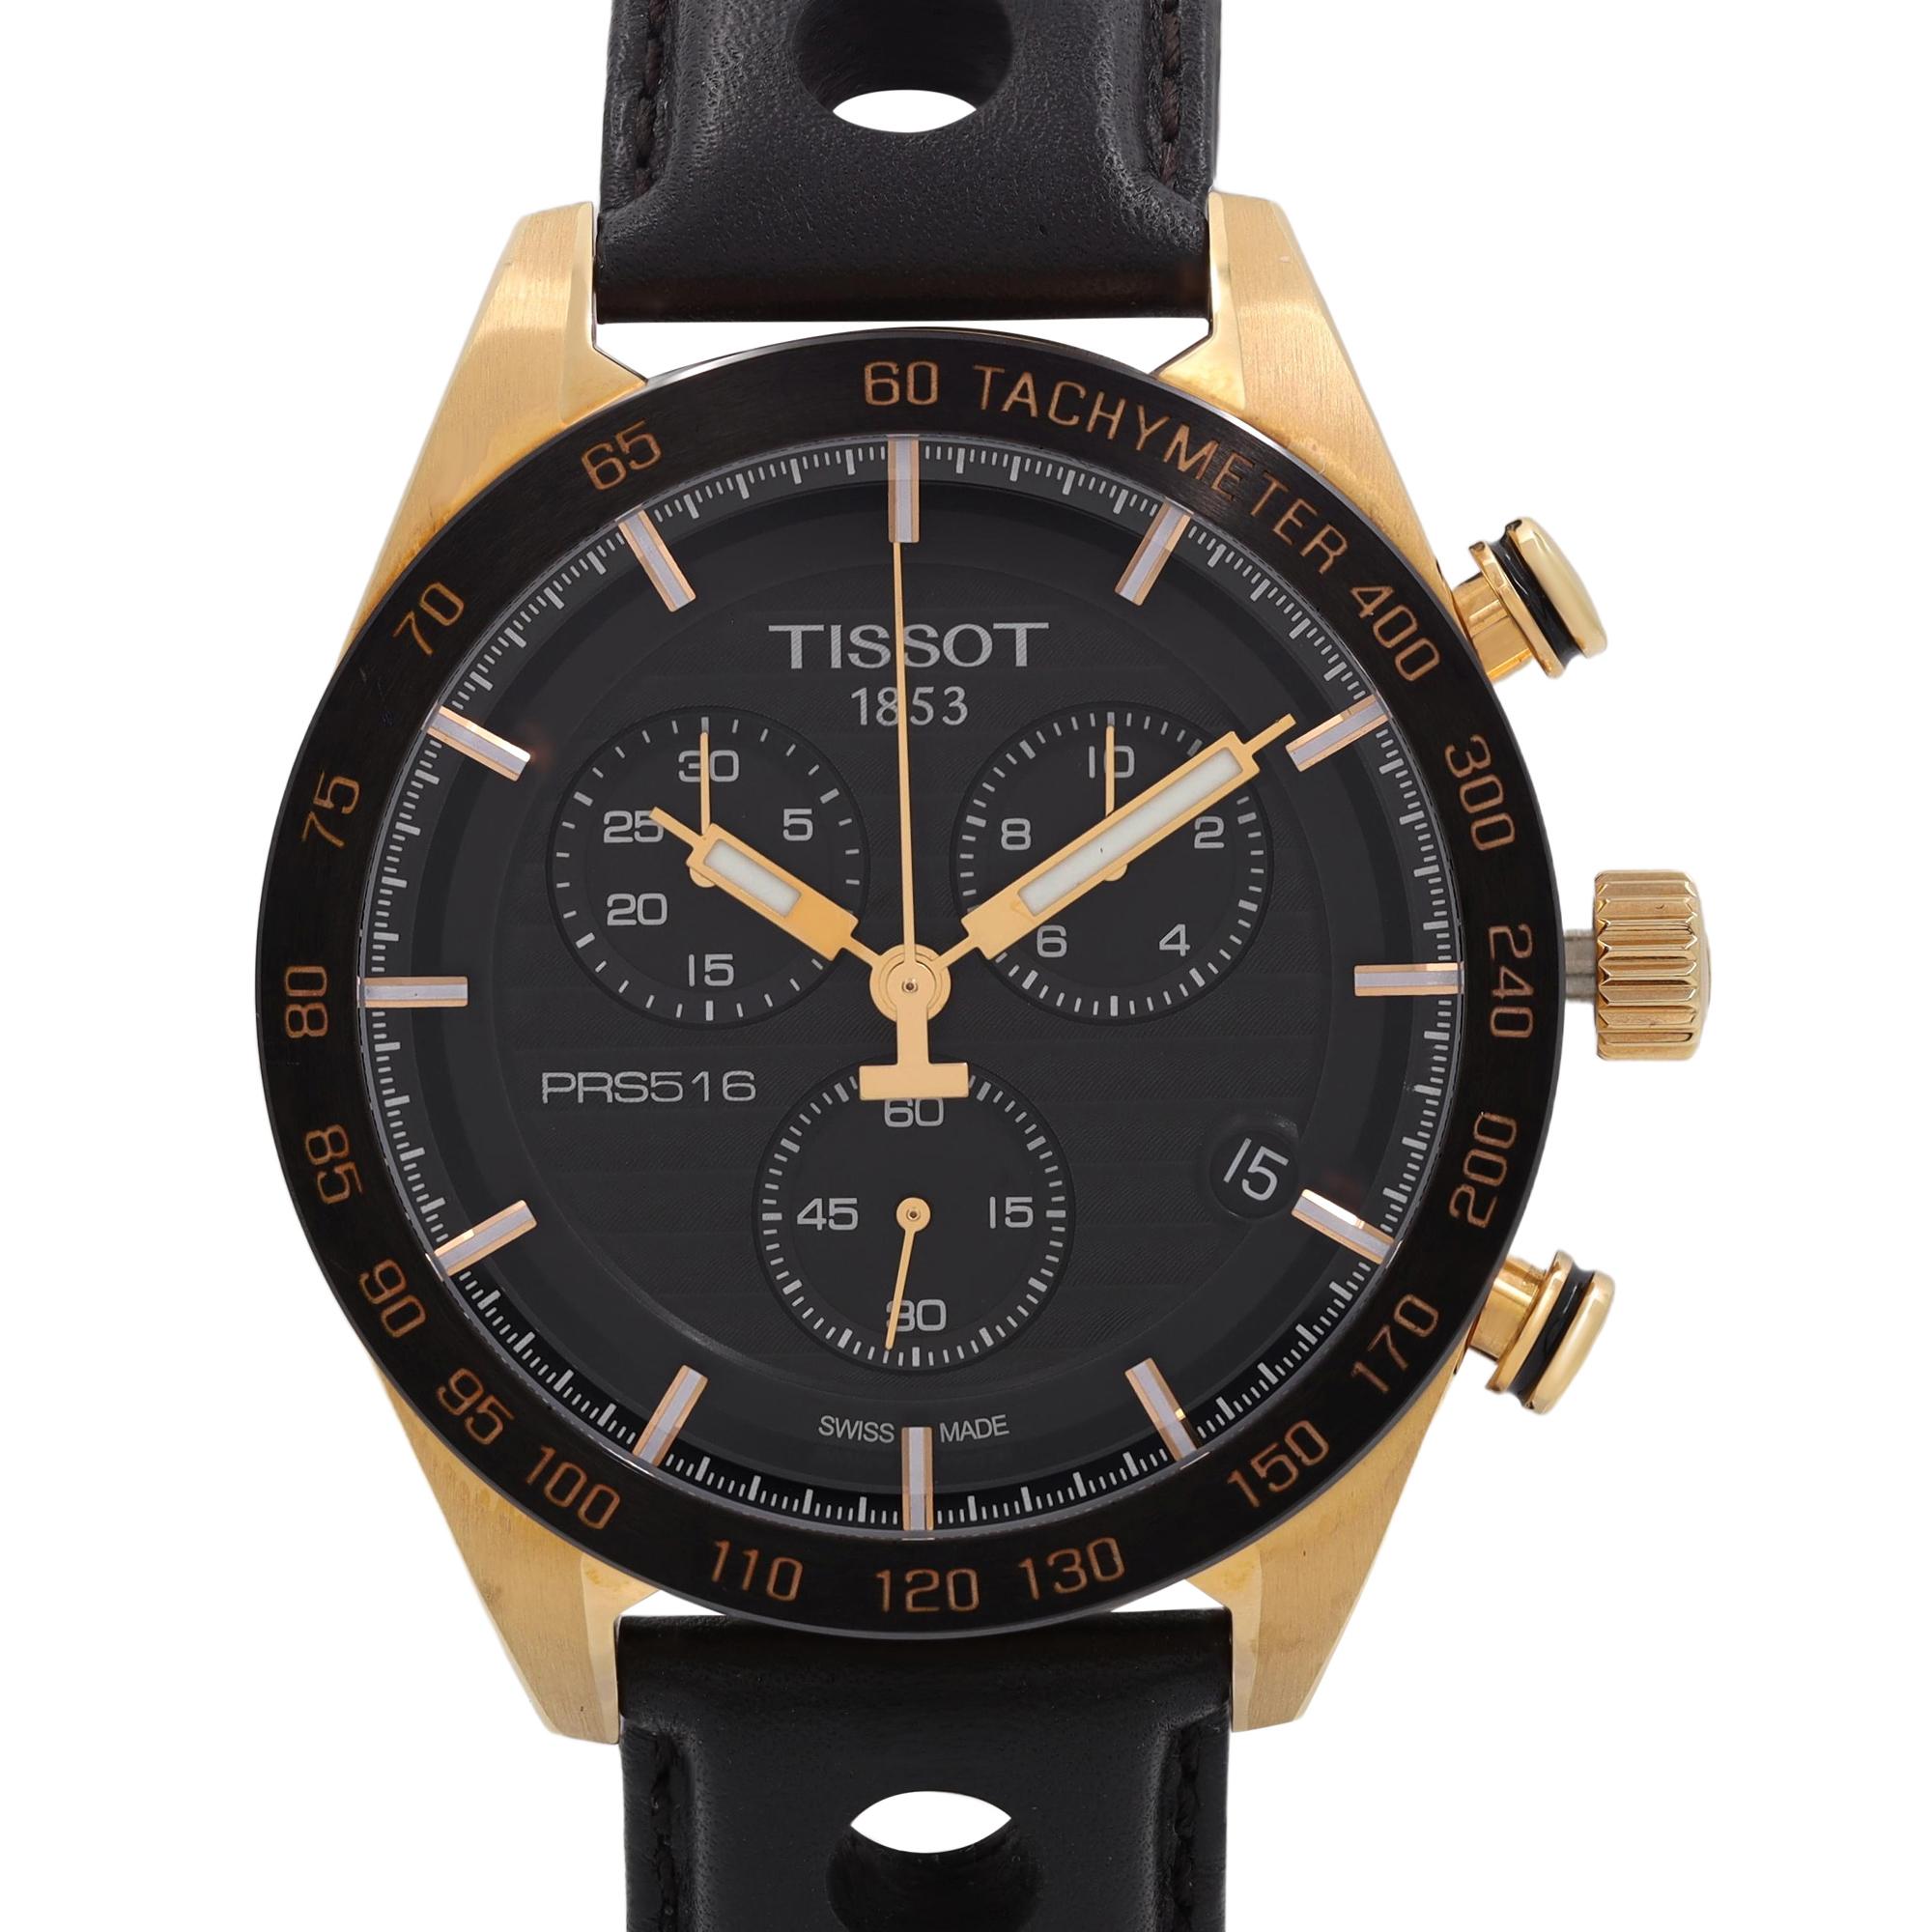 Unworn Tissot PRS 516 Chronograph Steel Black Dial Quartz Men's Watch T100.417.36.051.00. This Beautiful Timepiece is Powered by a Quartz (Battery) Movement and Features: Rose Gold-Tone Stainless Steel Case with a Black Two-Piece Leather Strap.